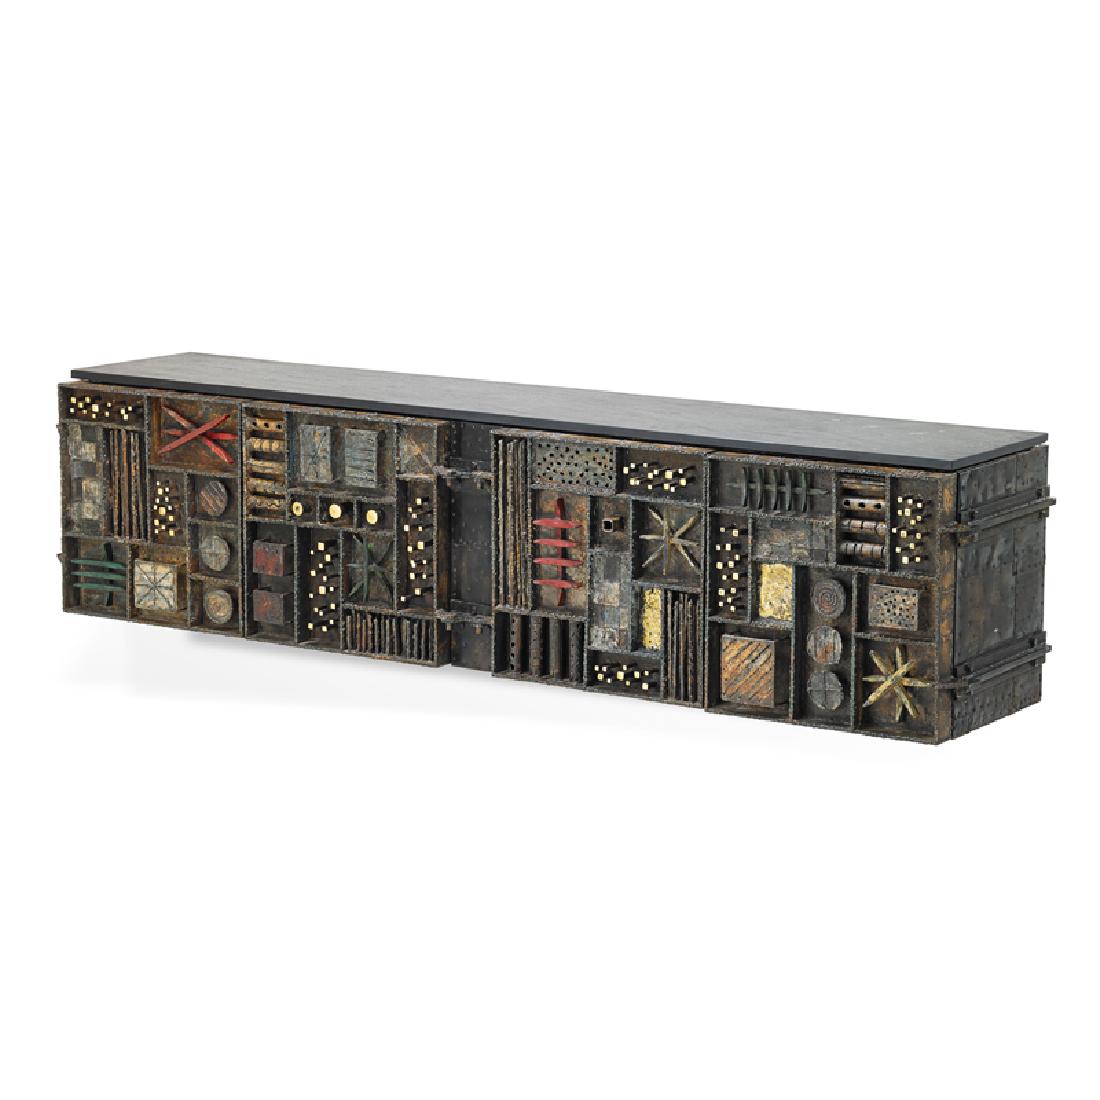 Rago salutes 20th century design with multisession auction May 20-21